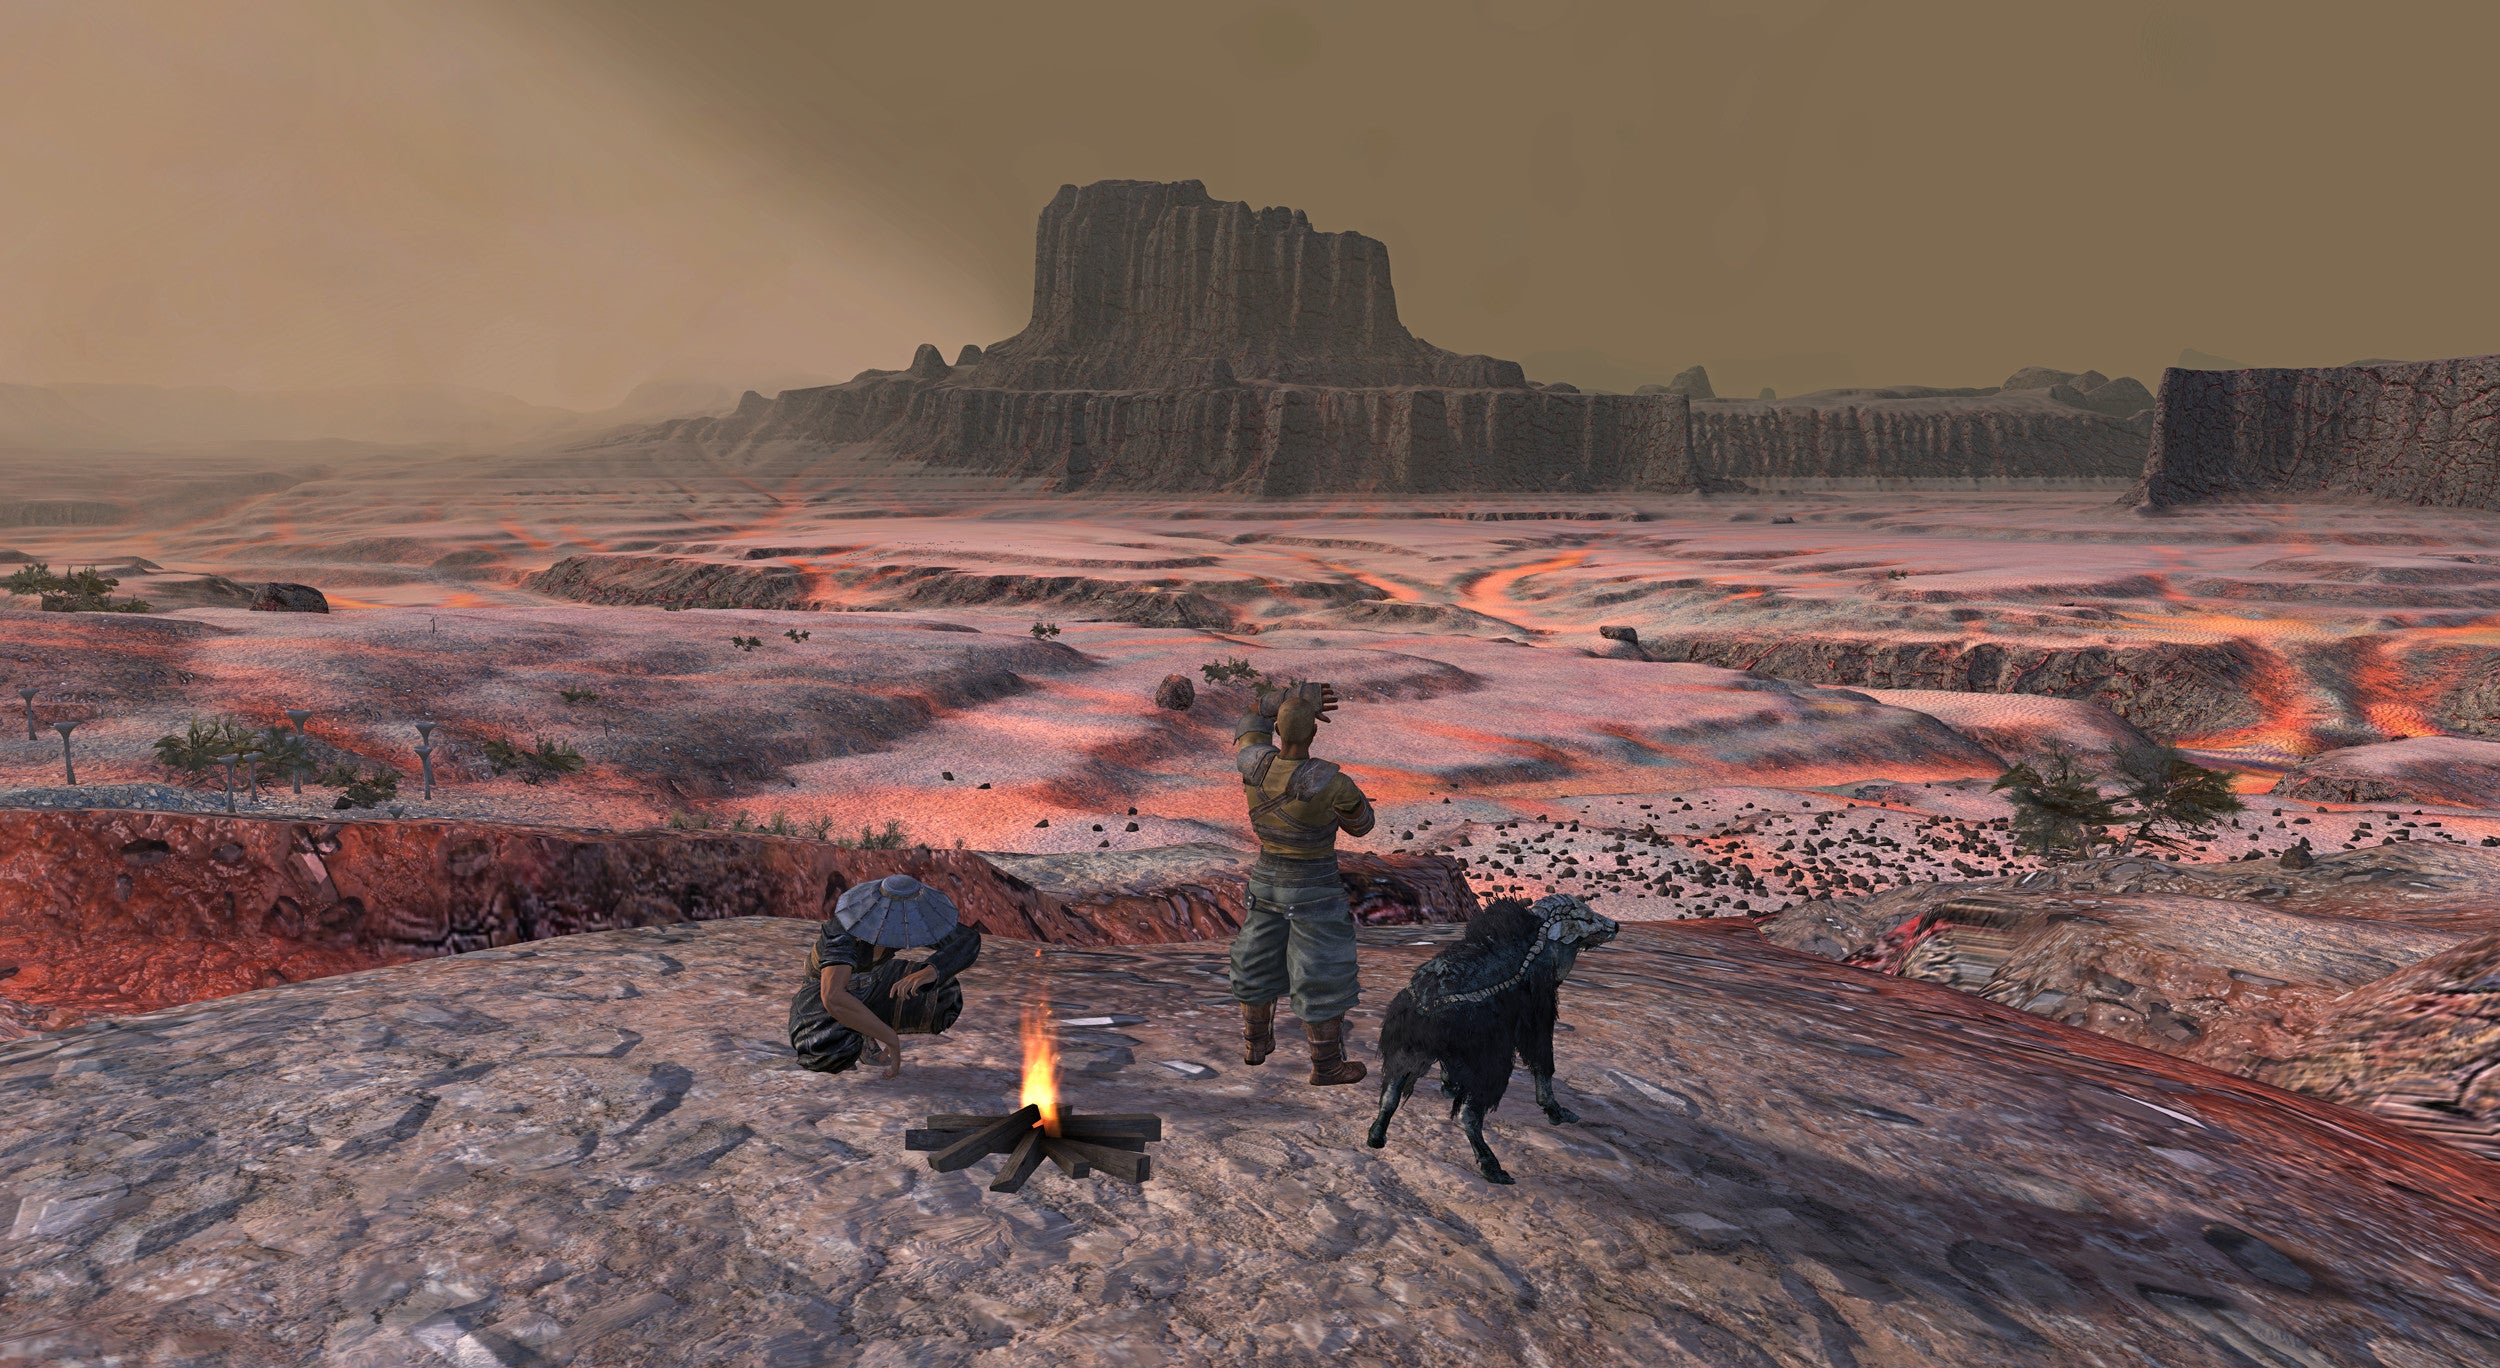 Two men and an alien goat gather round a campfire as they look out across a red, desert landscape in Kenshi